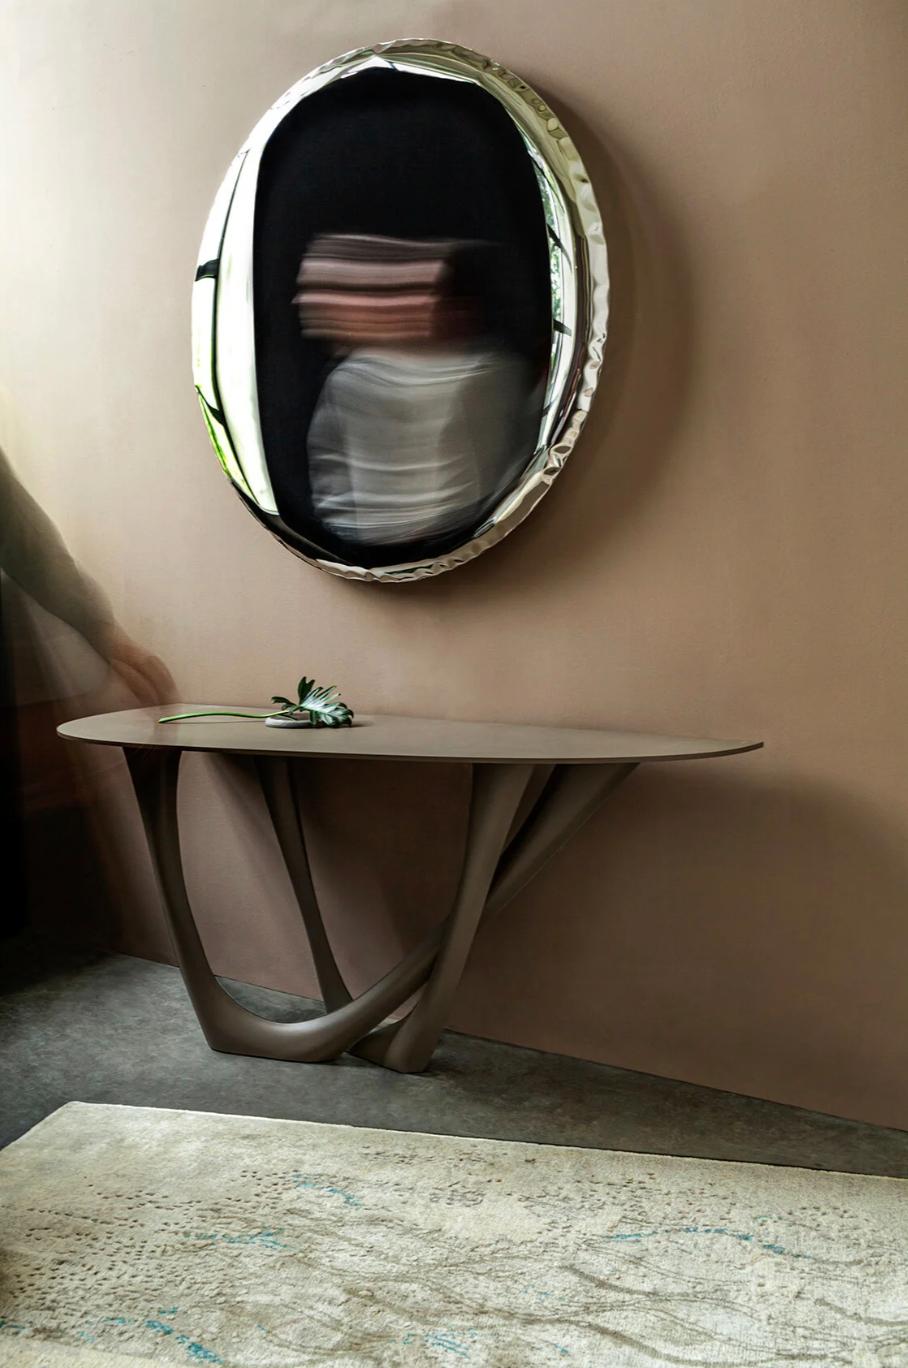 OKO is something more than just a mirror. It is one of the most perfect and simplest objects from Zieta’s mirrors collection. It is unique formally and technologically. Its ideally round, lustrous surface delicately reflects and diffuses light